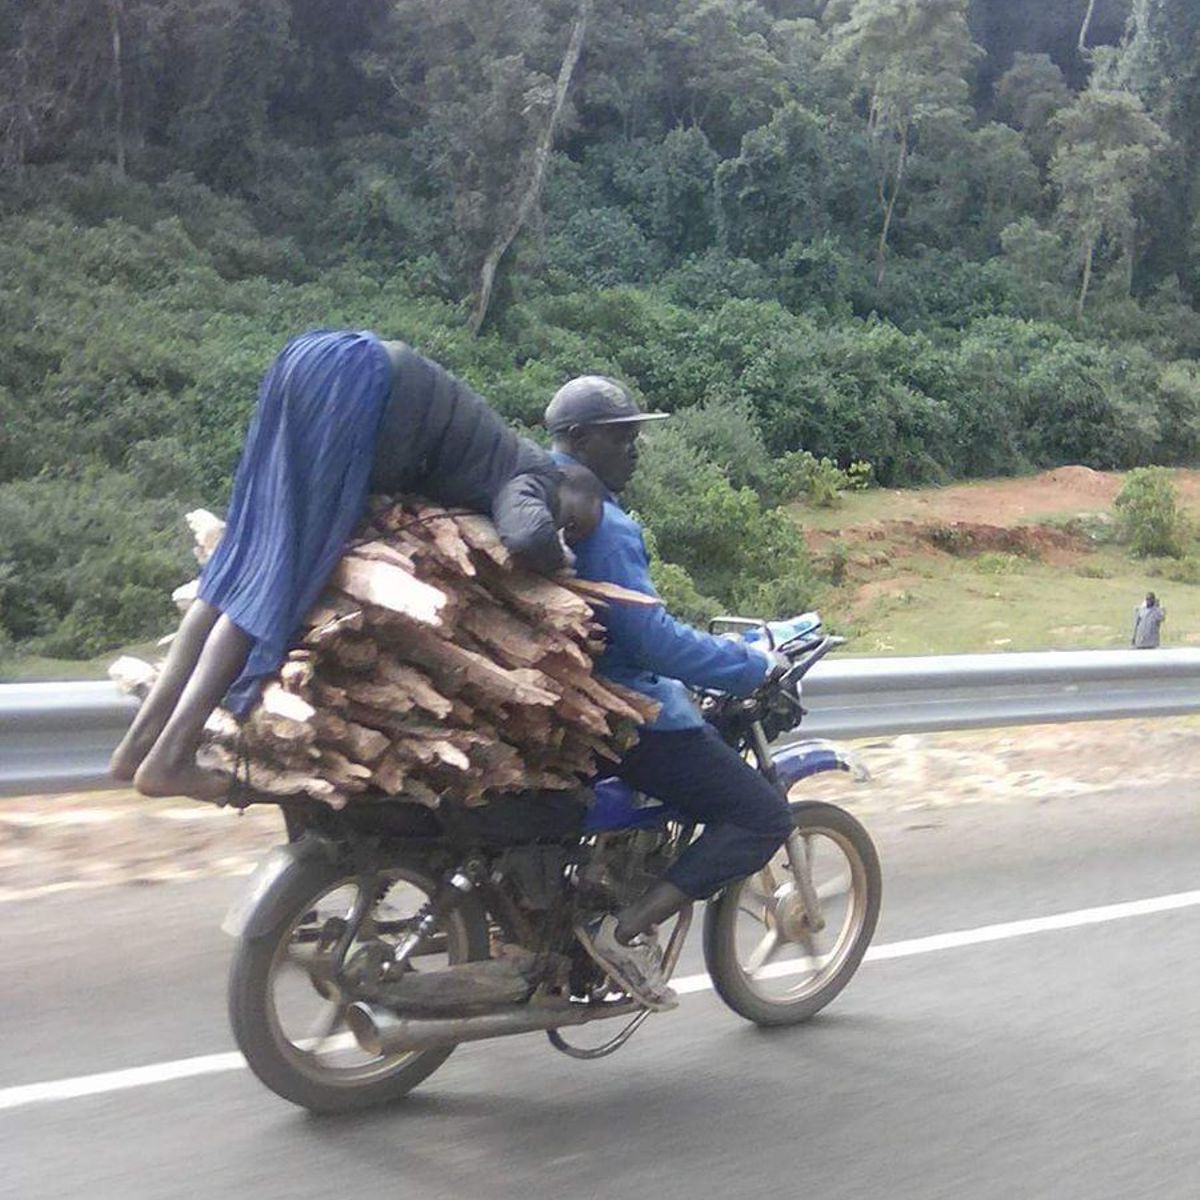 @AAKenya I totally don't advocate for this kind of madness. #3500lives #bodabodasafety #SafetyFirst